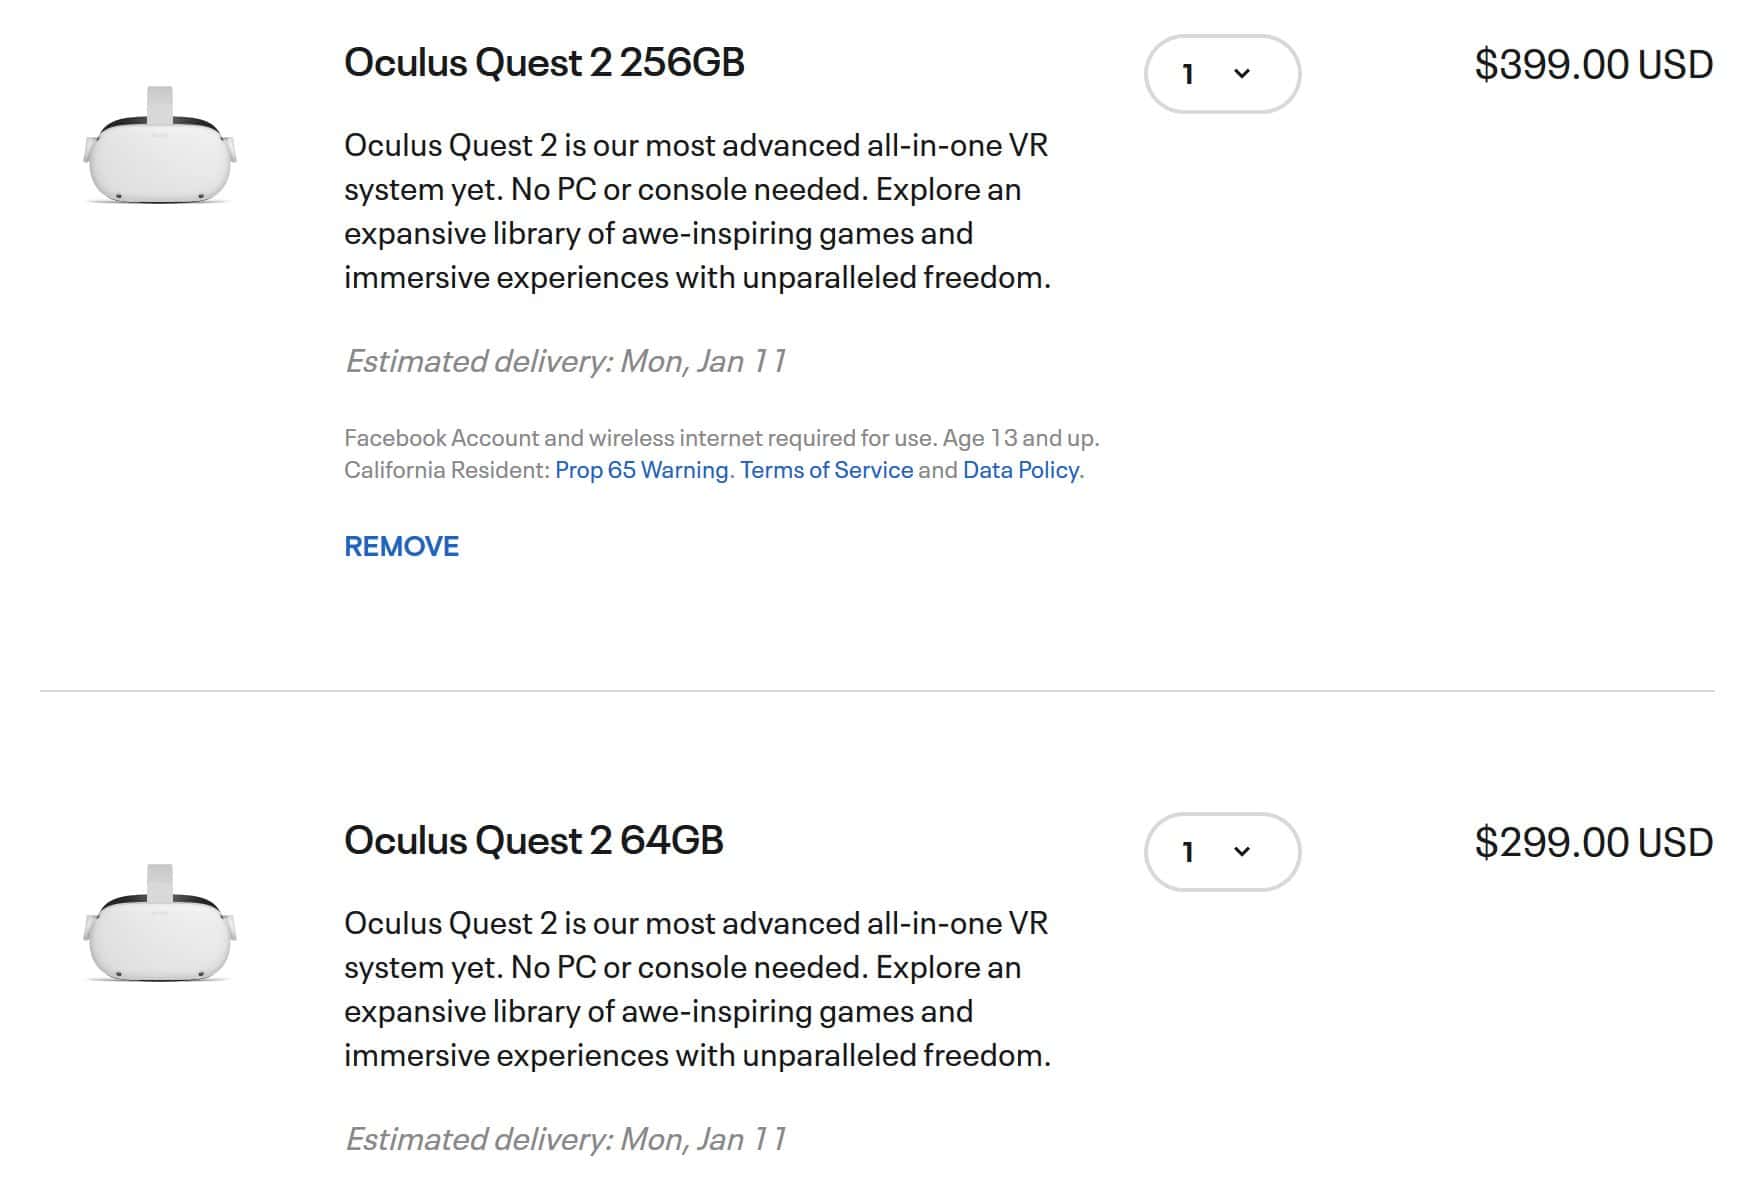 Oculus Quest 2 Sold Through The End Of 2020